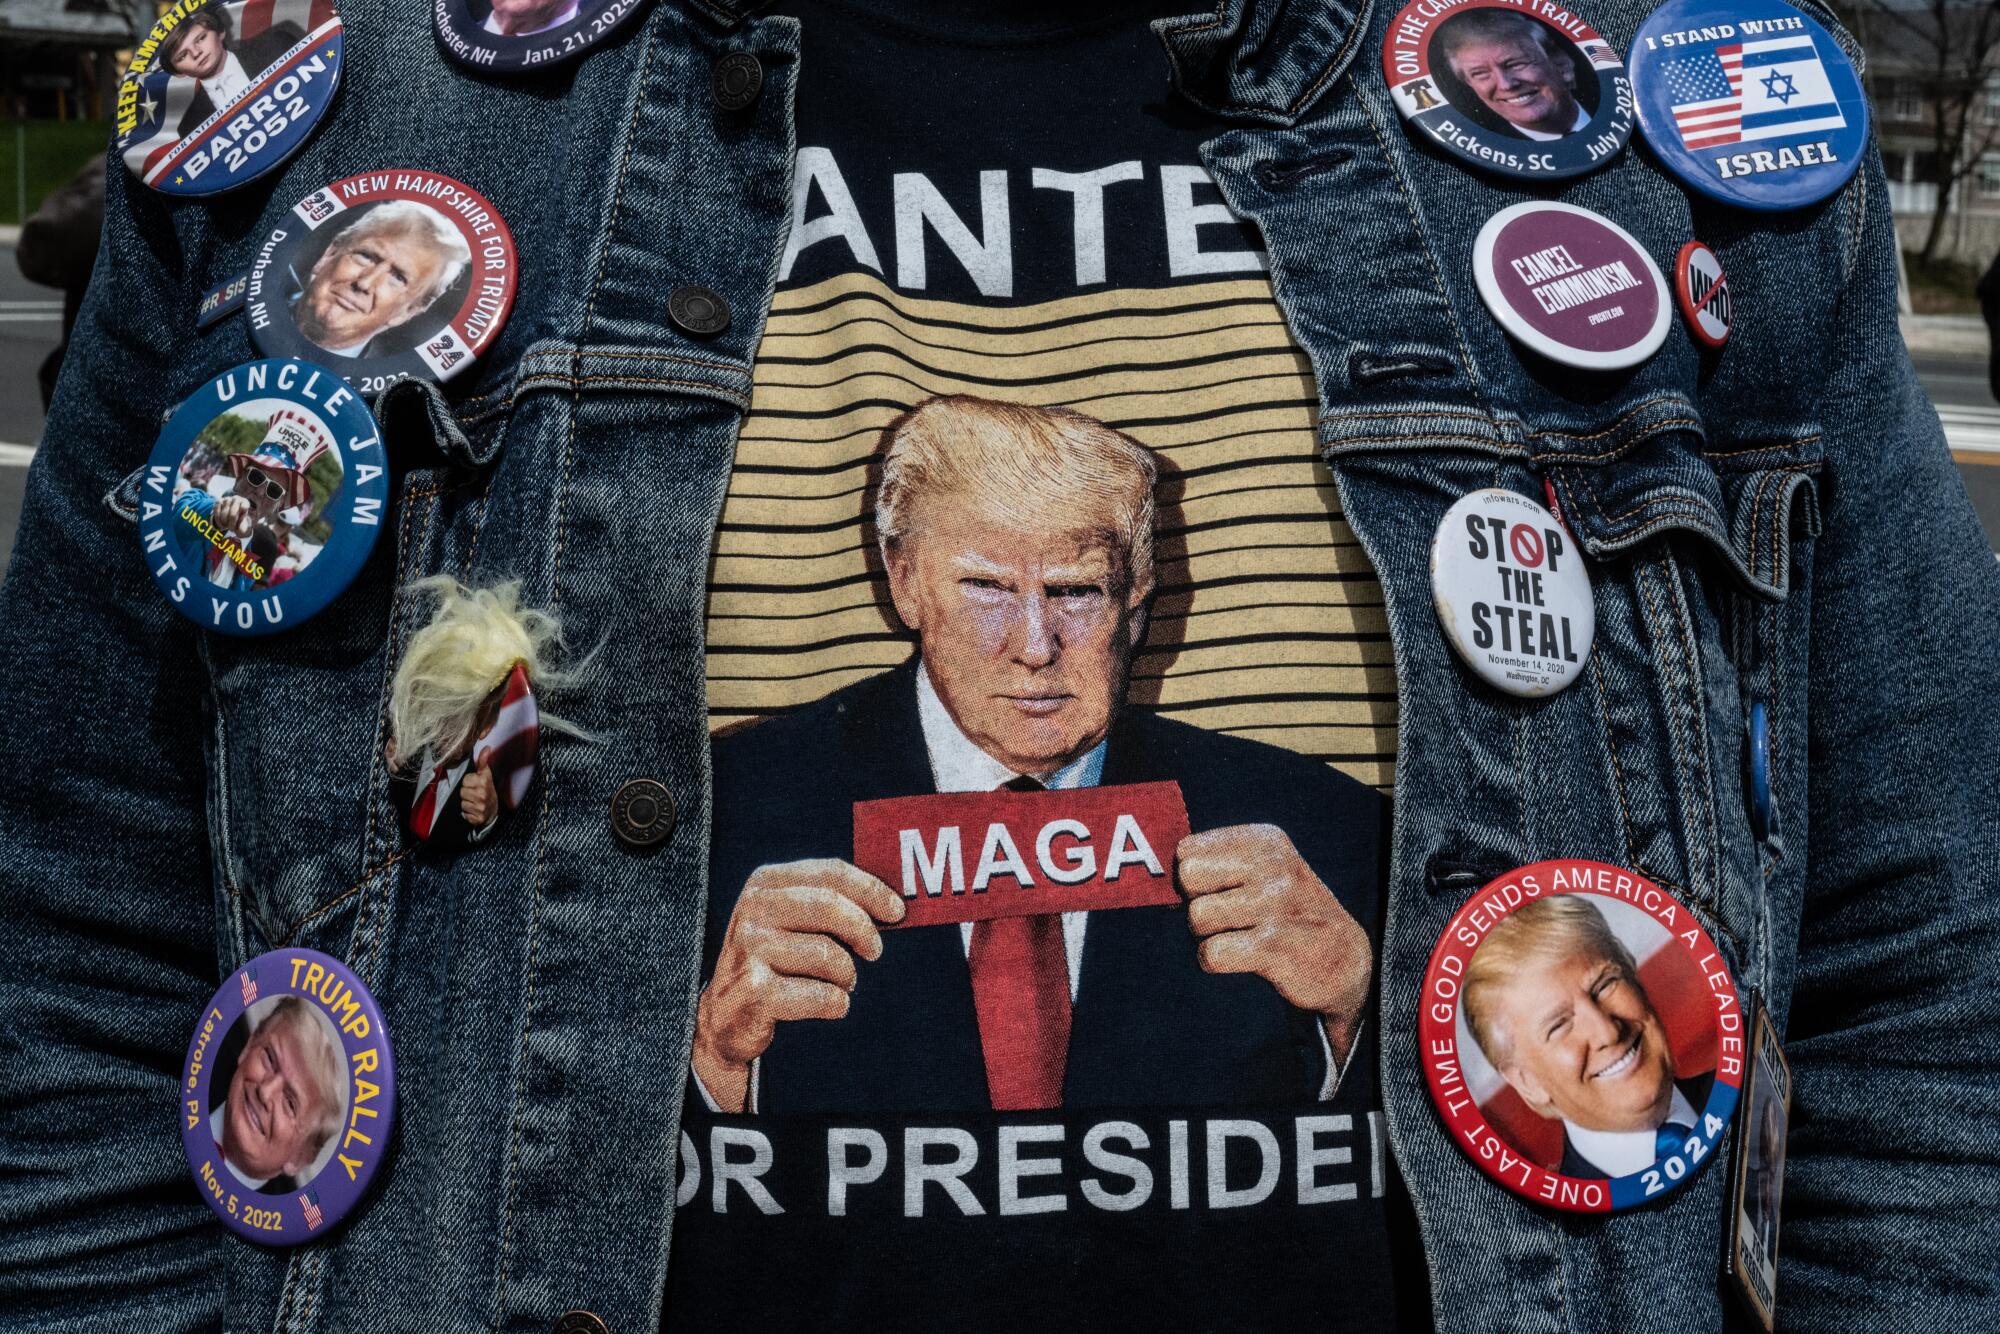 The chest of a person wearing a Trump shirt and a jean jacket decorated with 12 political buttons, most of them for Trump.